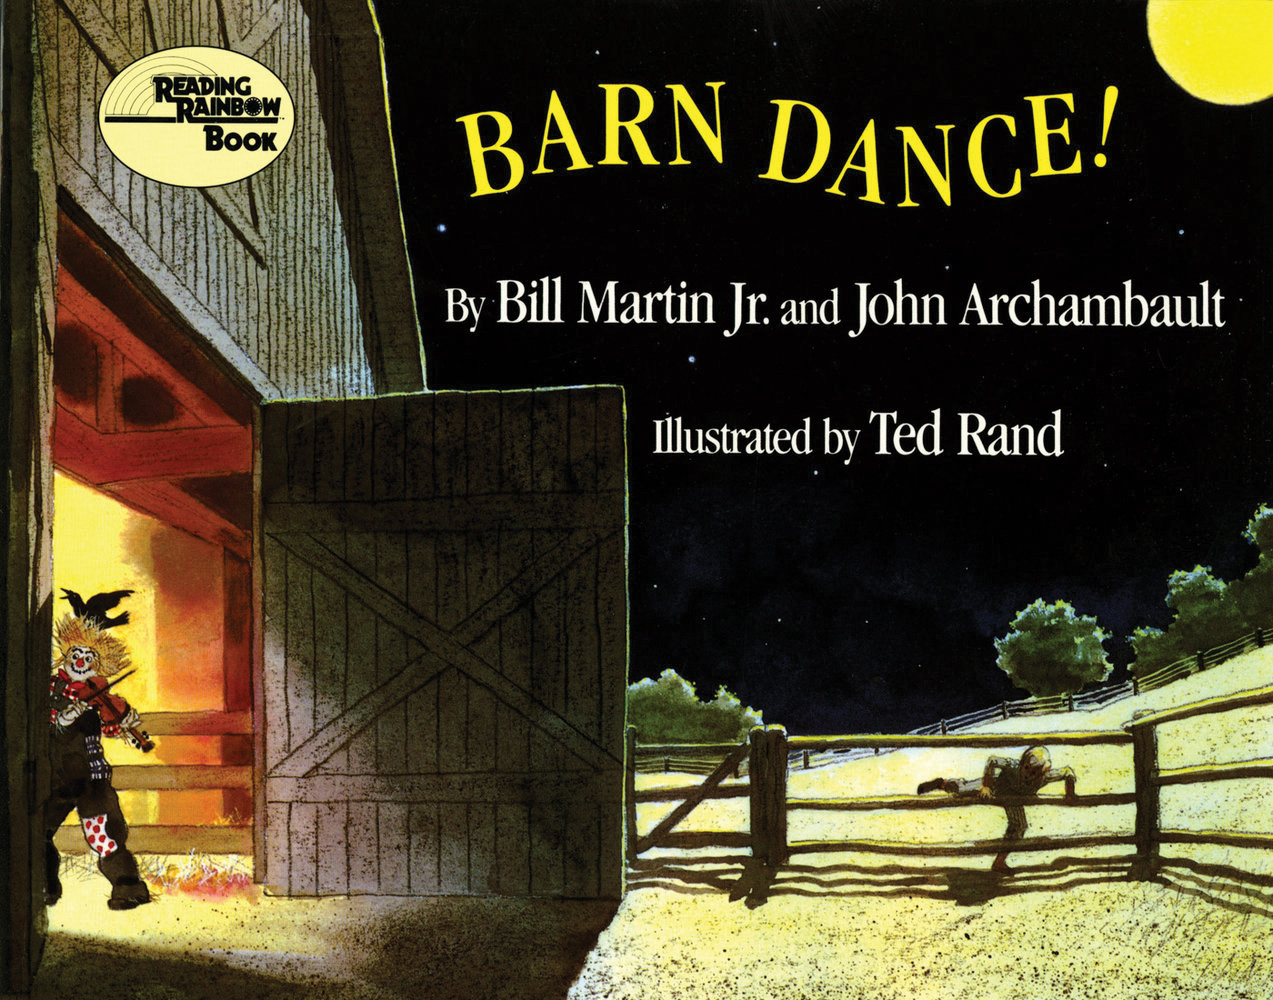 Cover art for "Barn Dance!" depicting a scarecrow with a crow on its head entering a barn